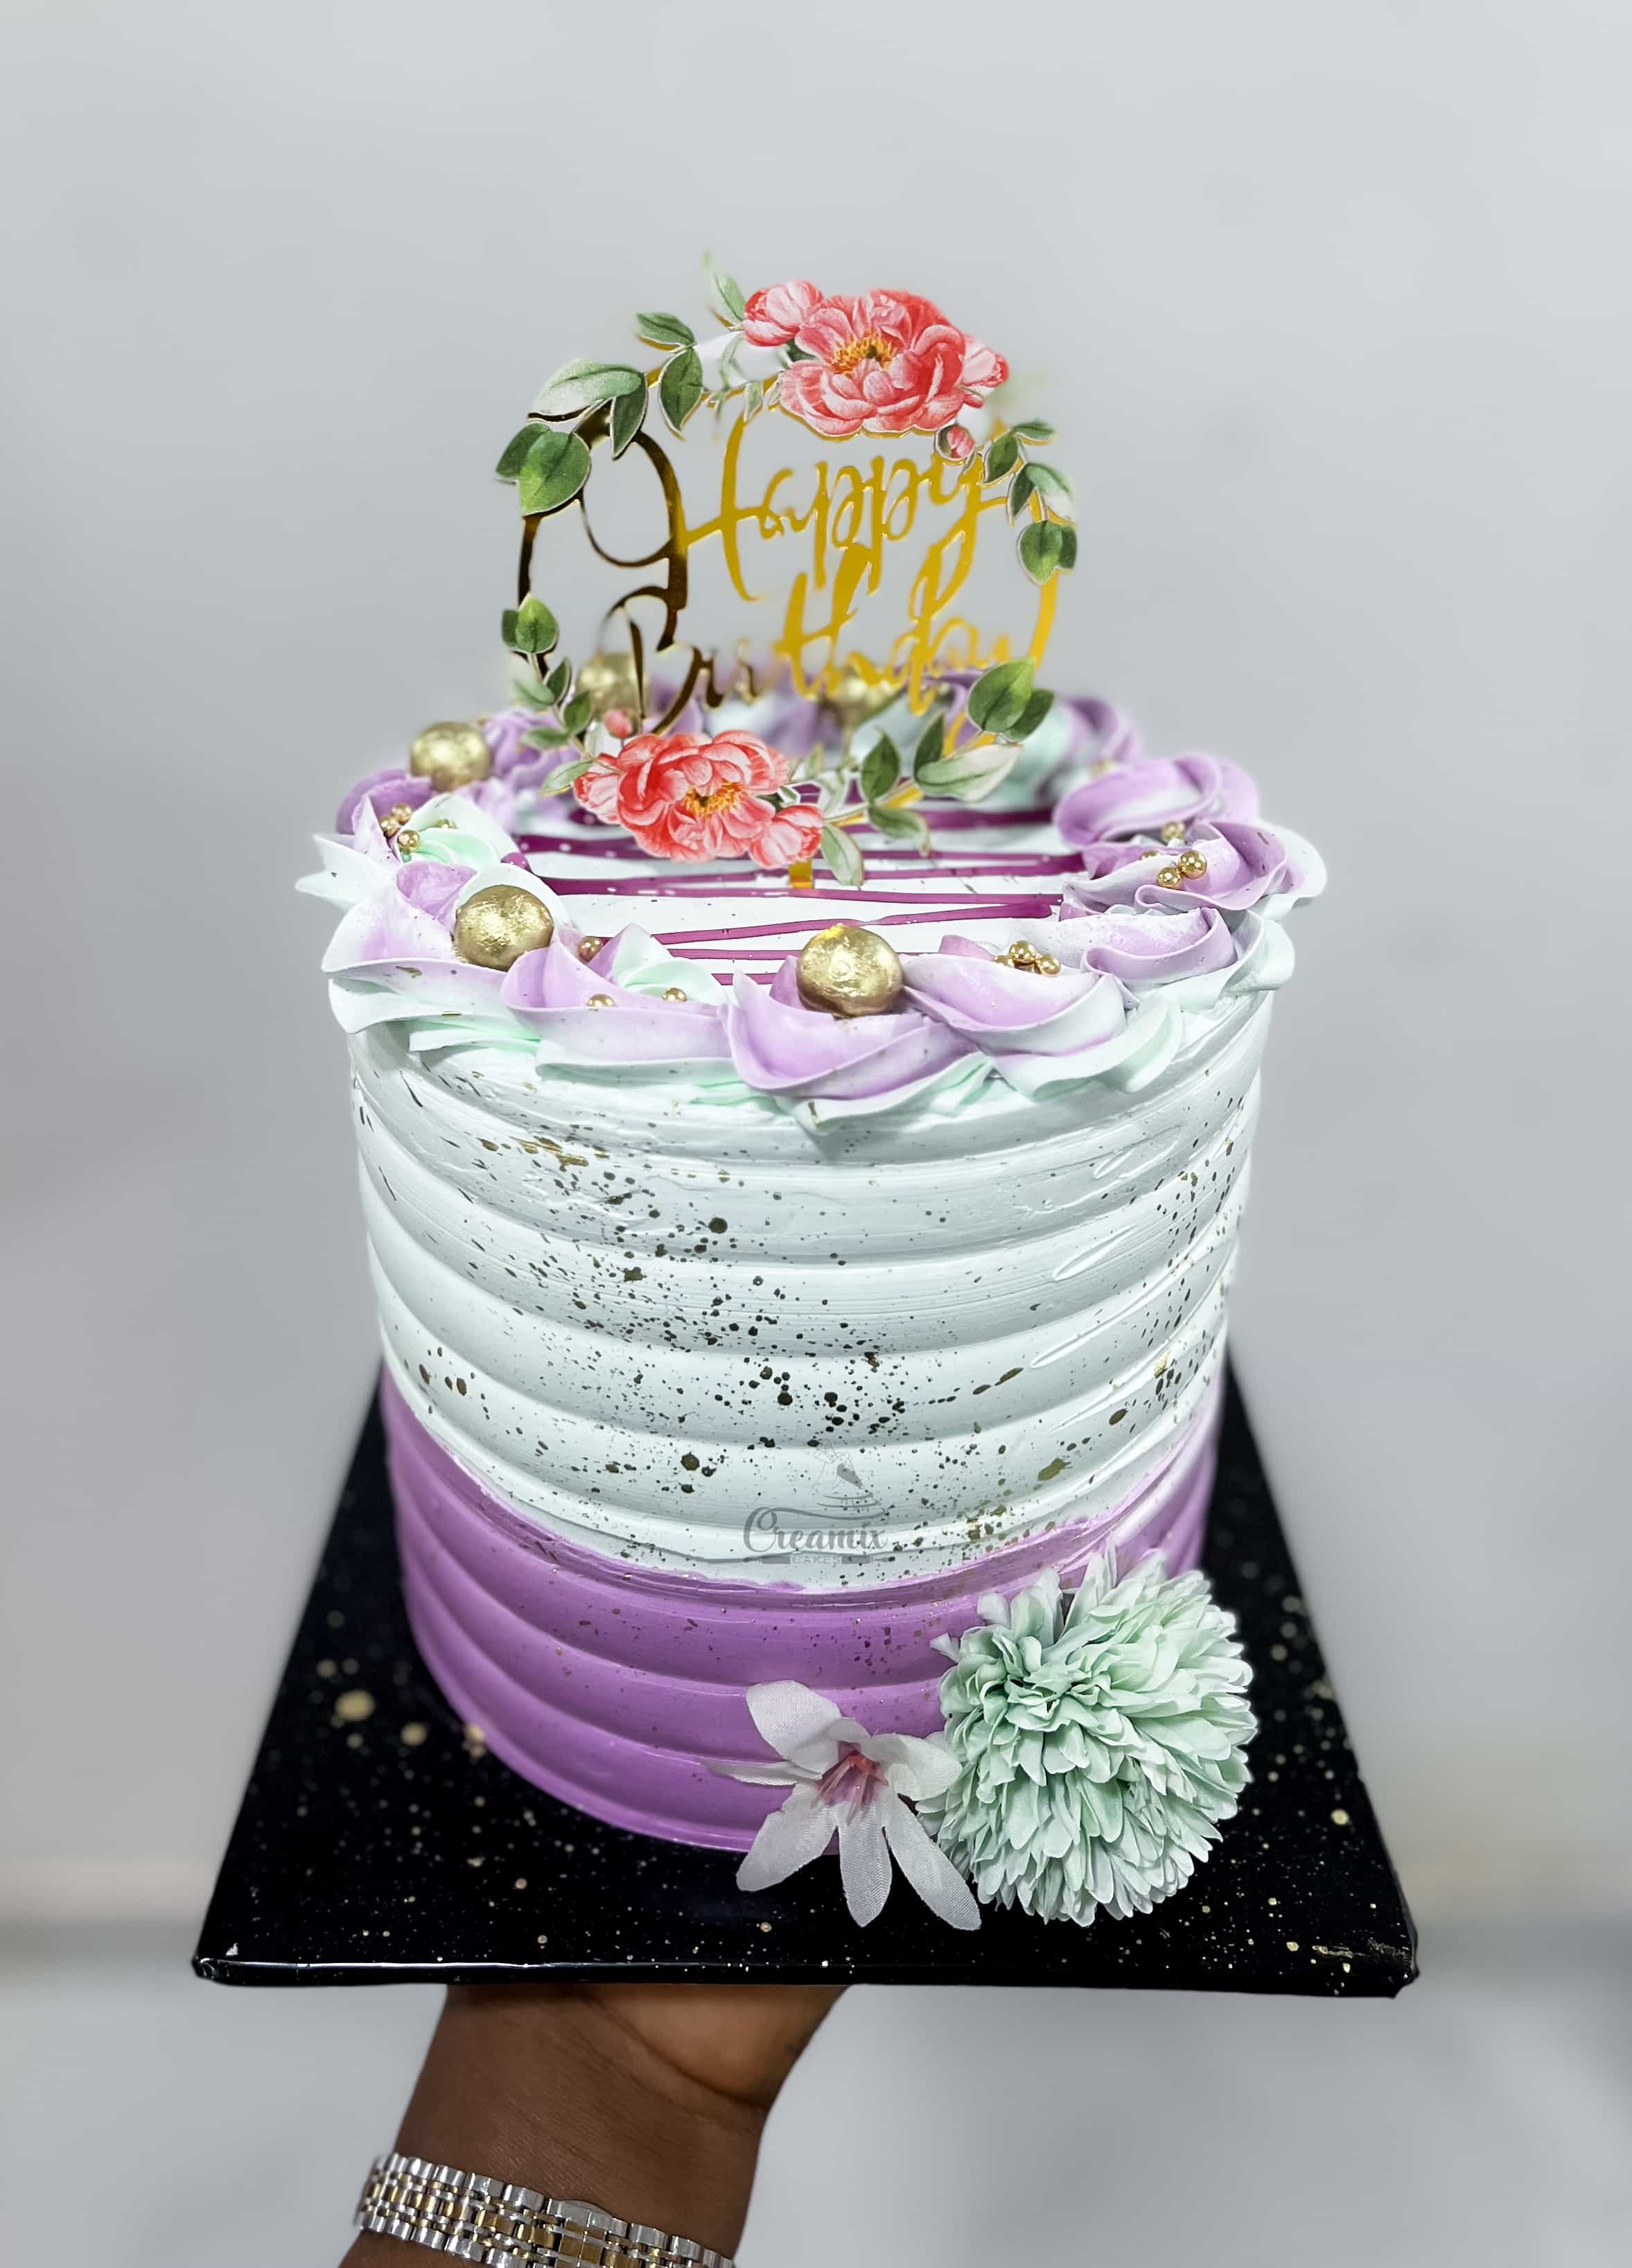 Purple & Green With Flowered Topper - Available in Vanilla, Red Velvet, Chocolate, etc.